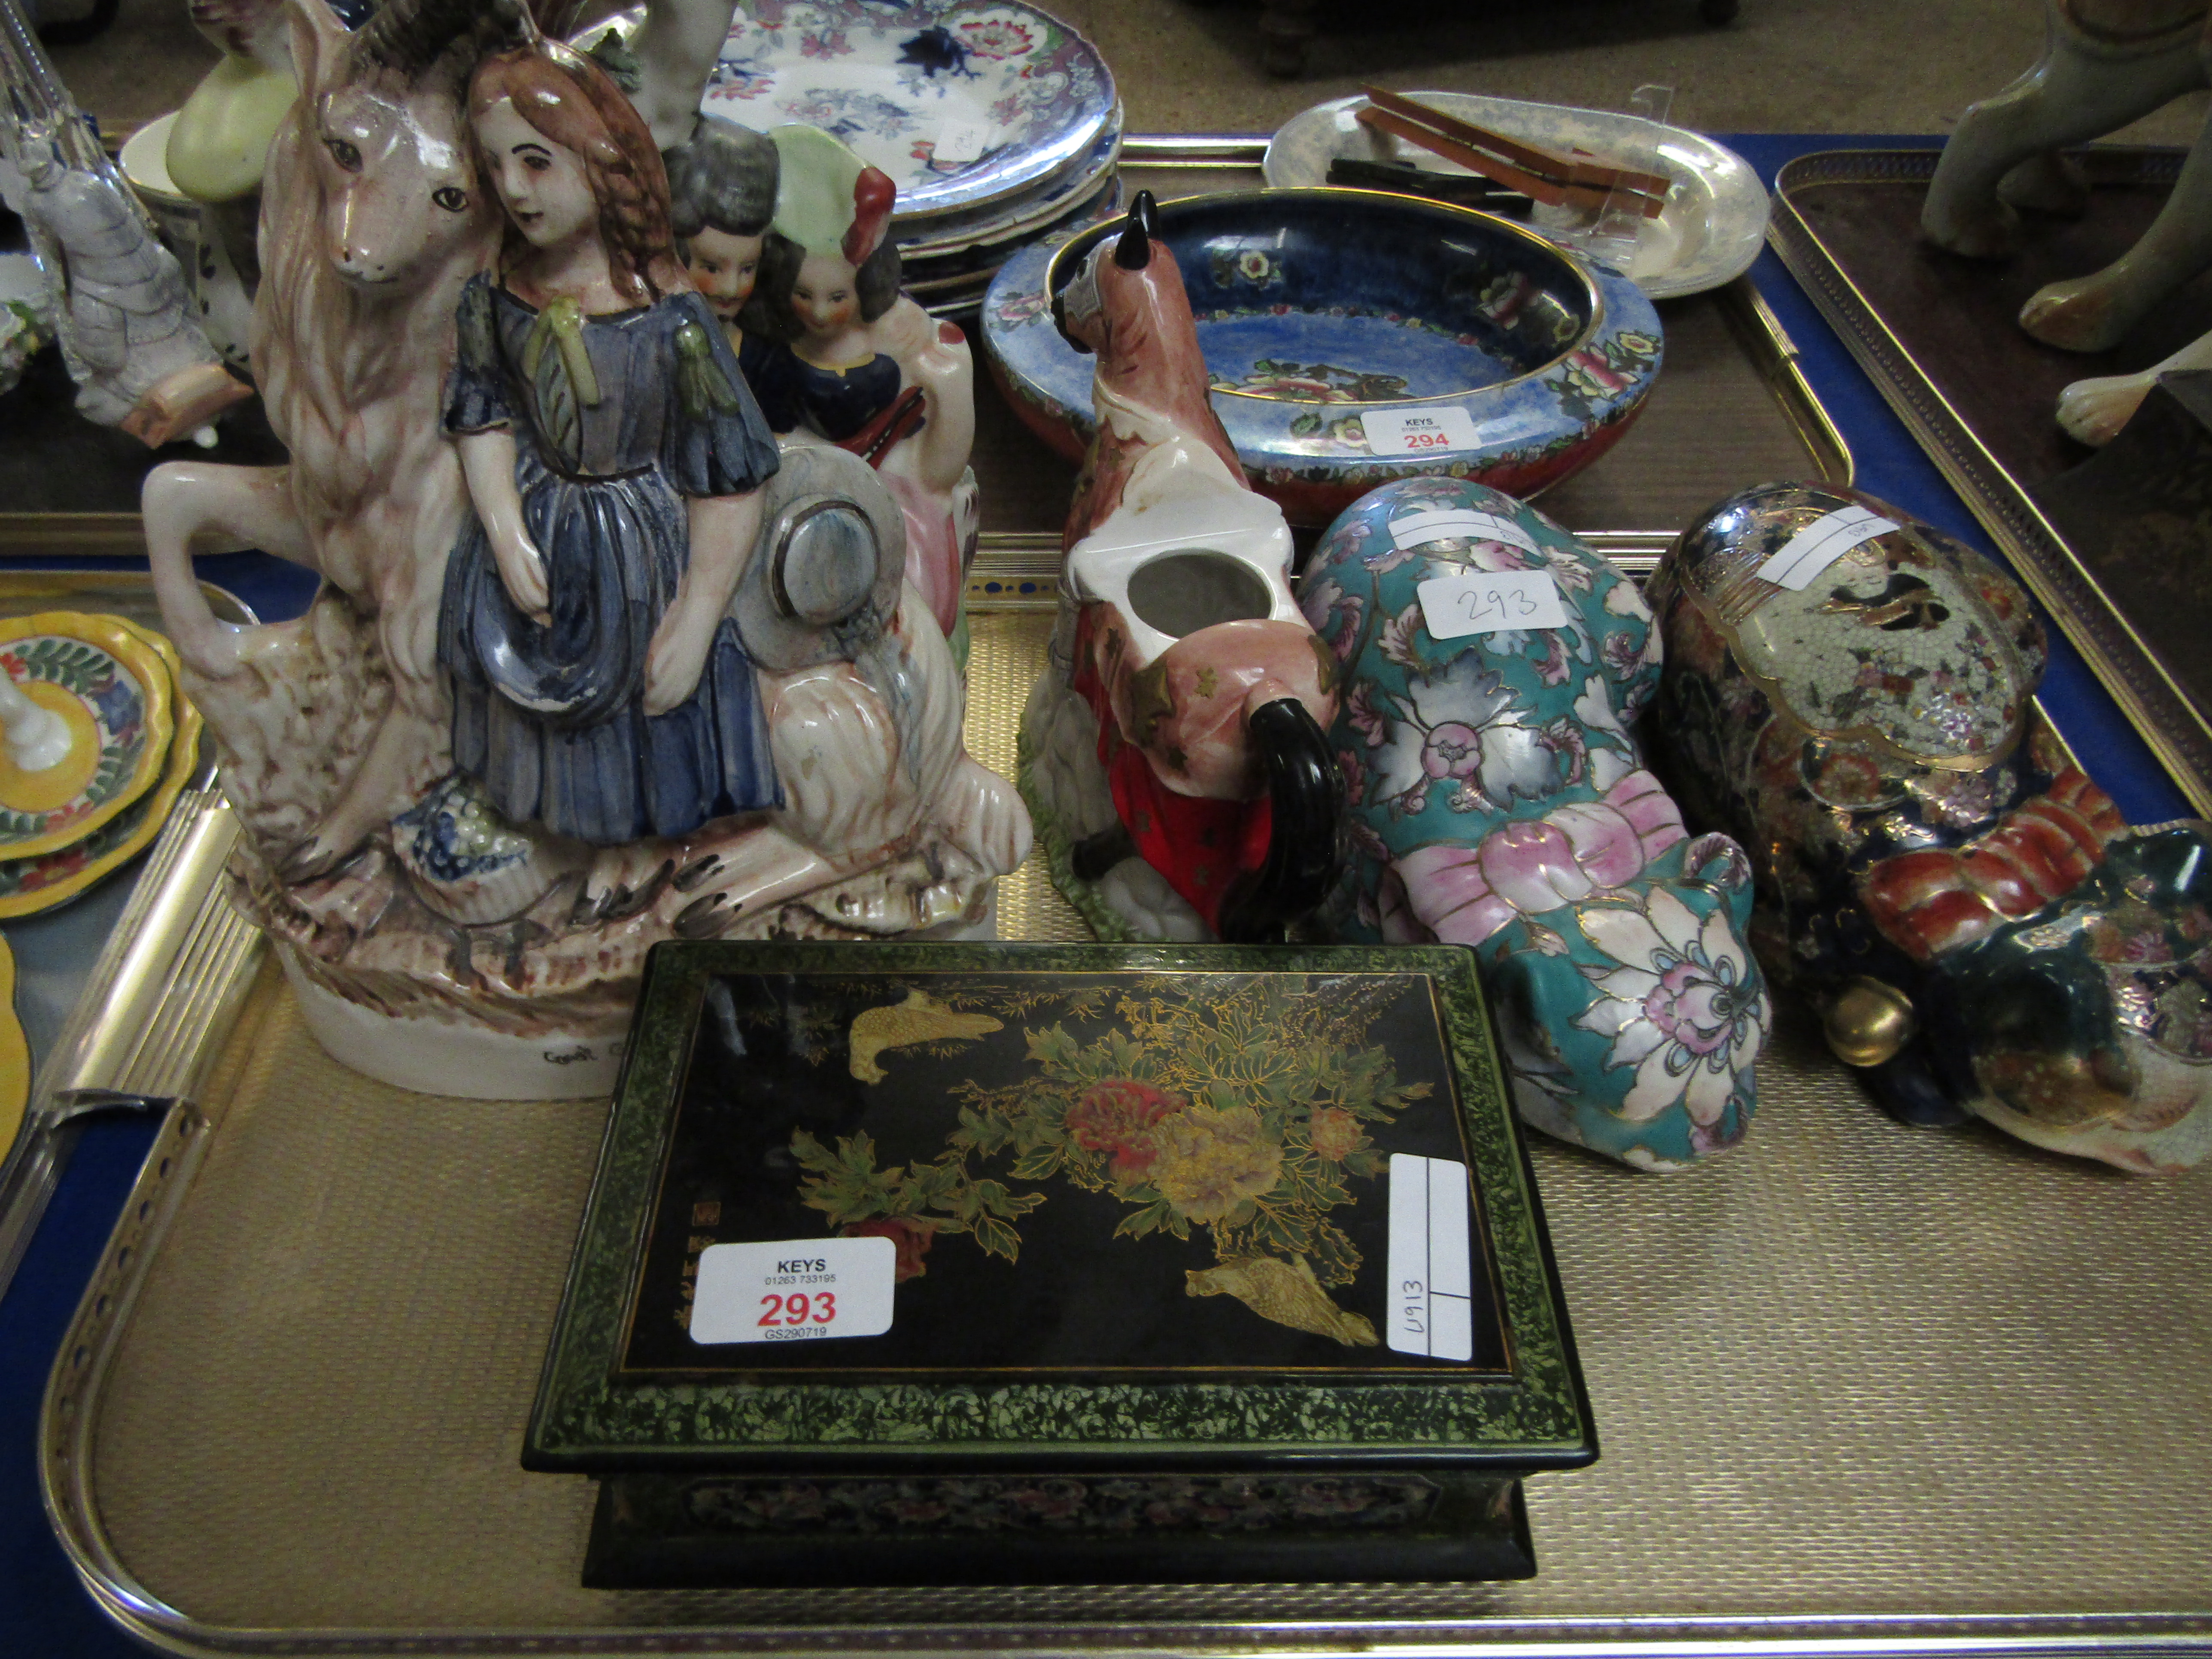 STAFFORDSHIRE TYPE FIGURES, A LACQUERED JEWELLERY BOX ETC